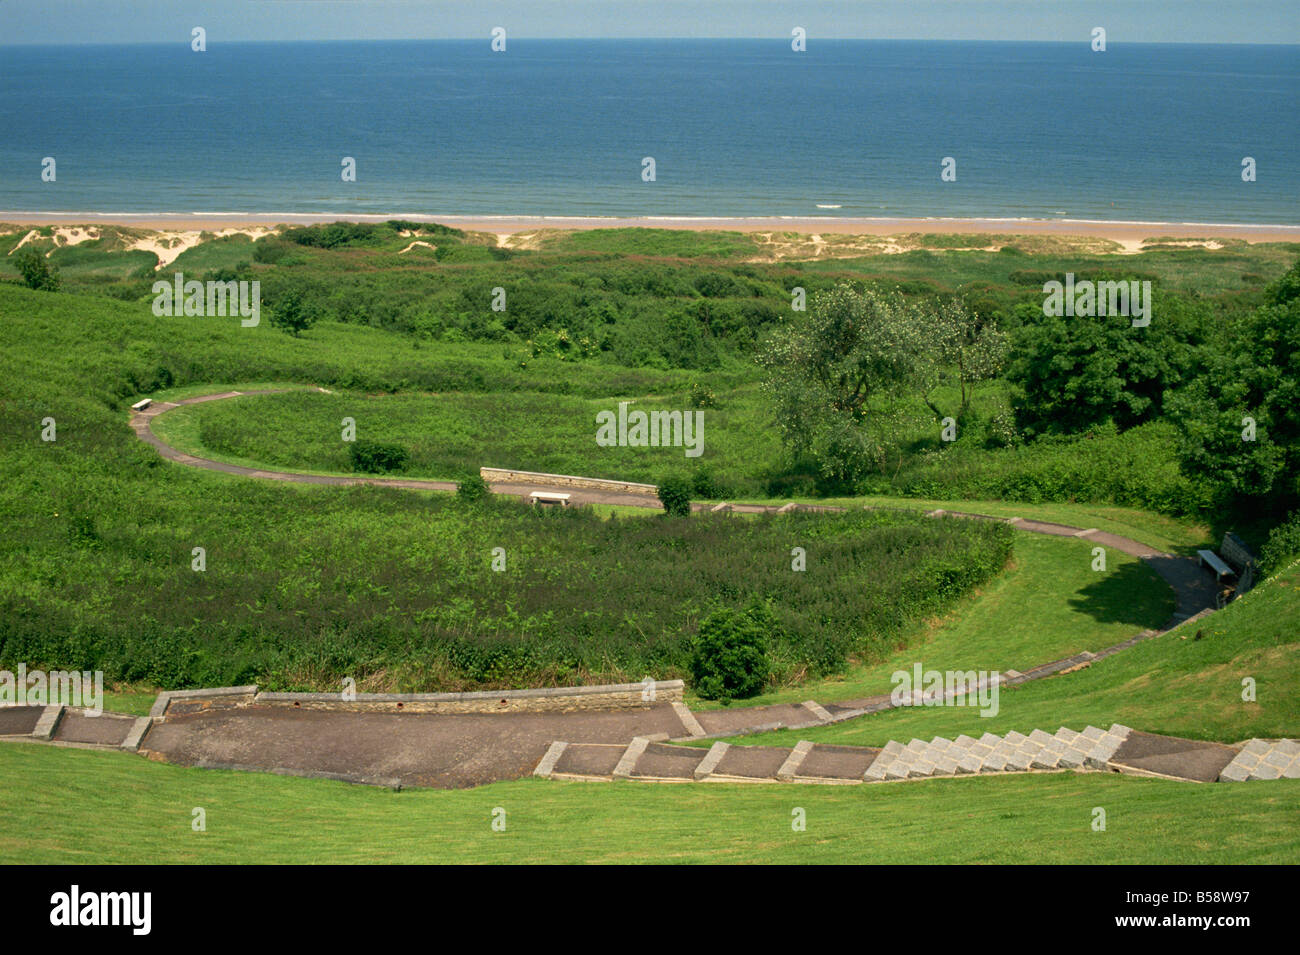 Omaha Landing Beach site of D Day Landings 6th June 1944 Normandy France Europe Stock Photo